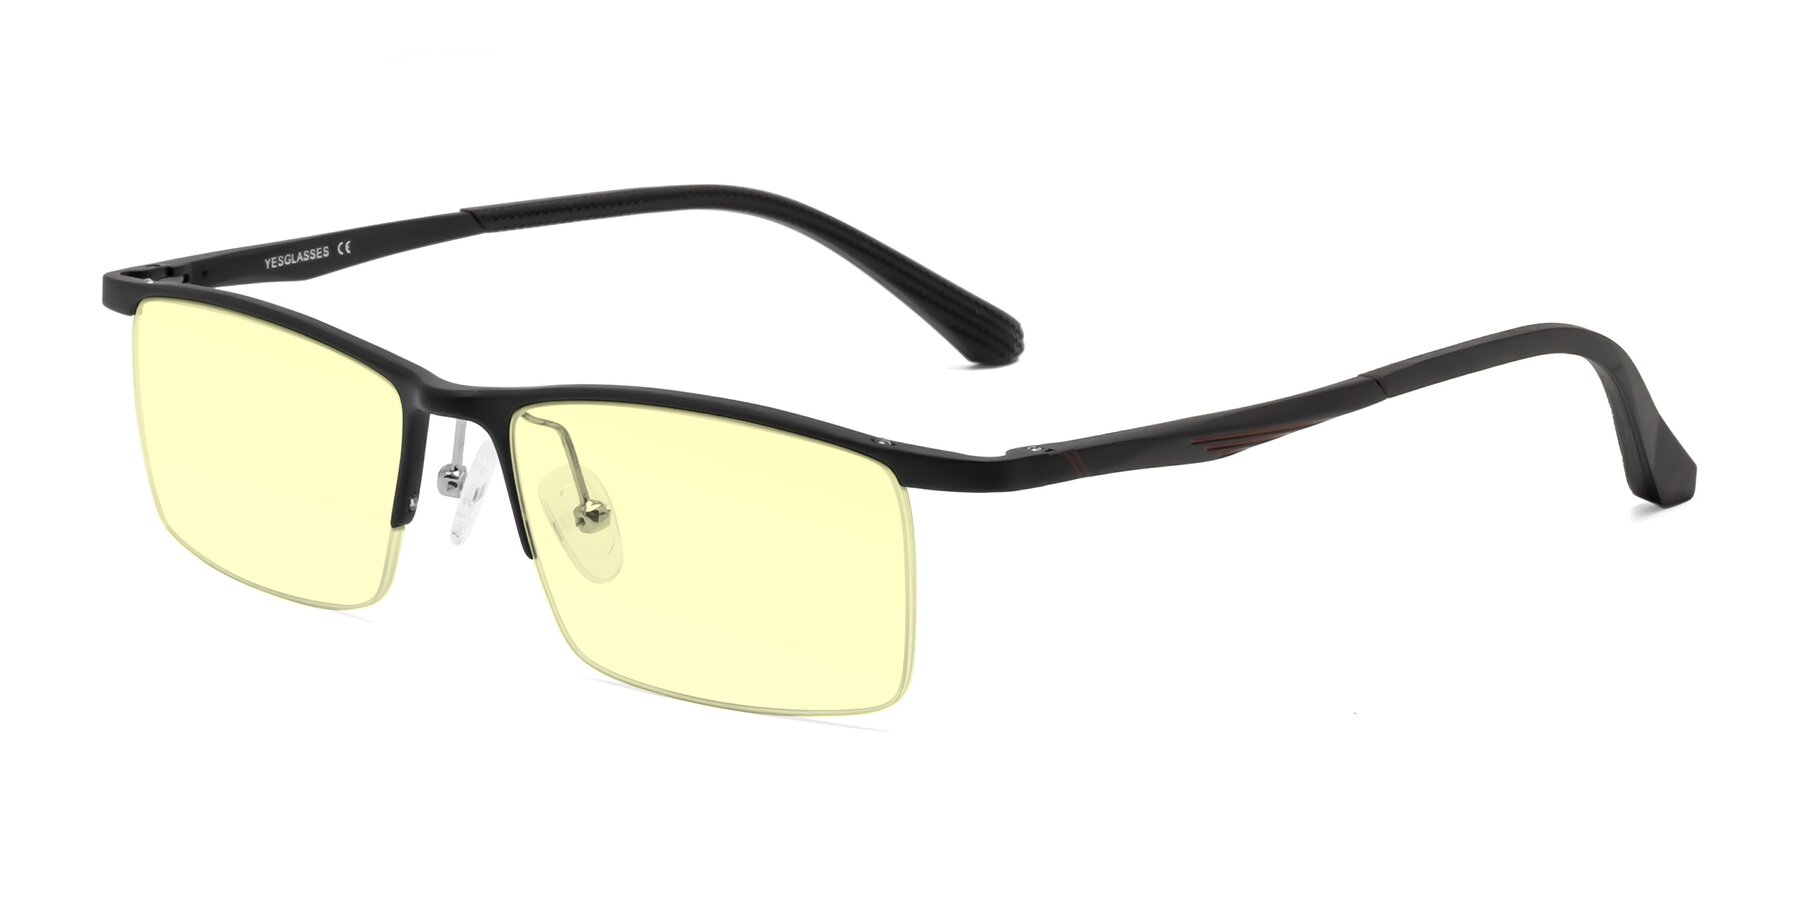 Angle of CX6236 in Black with Light Yellow Tinted Lenses